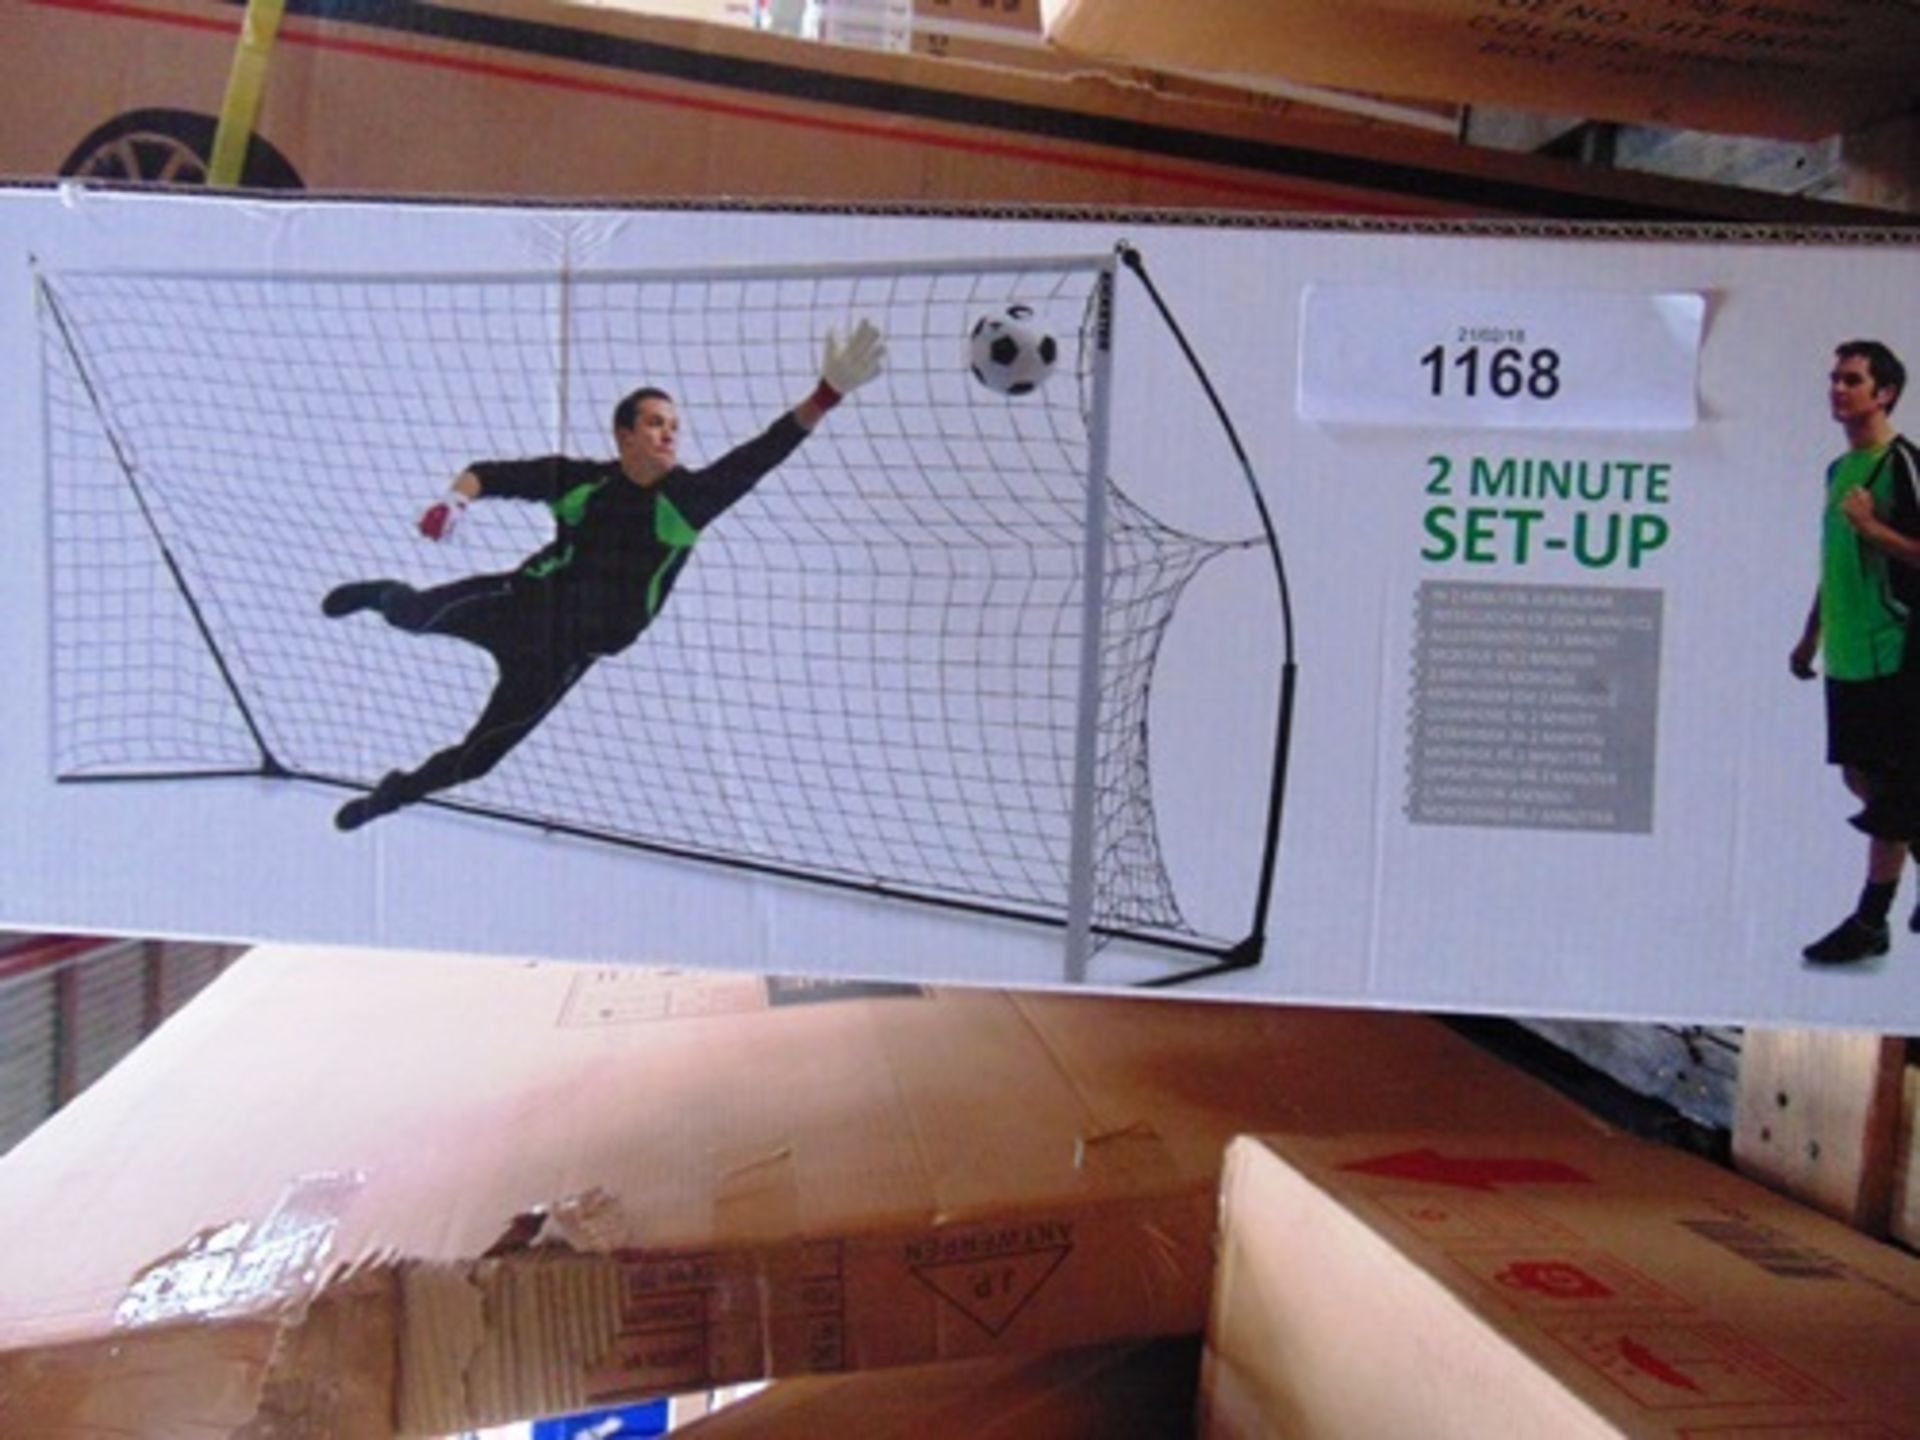 Flick Urban skill set football targets together with Quick Play ultra-portable goal, 4.88 x 2. - Image 2 of 3